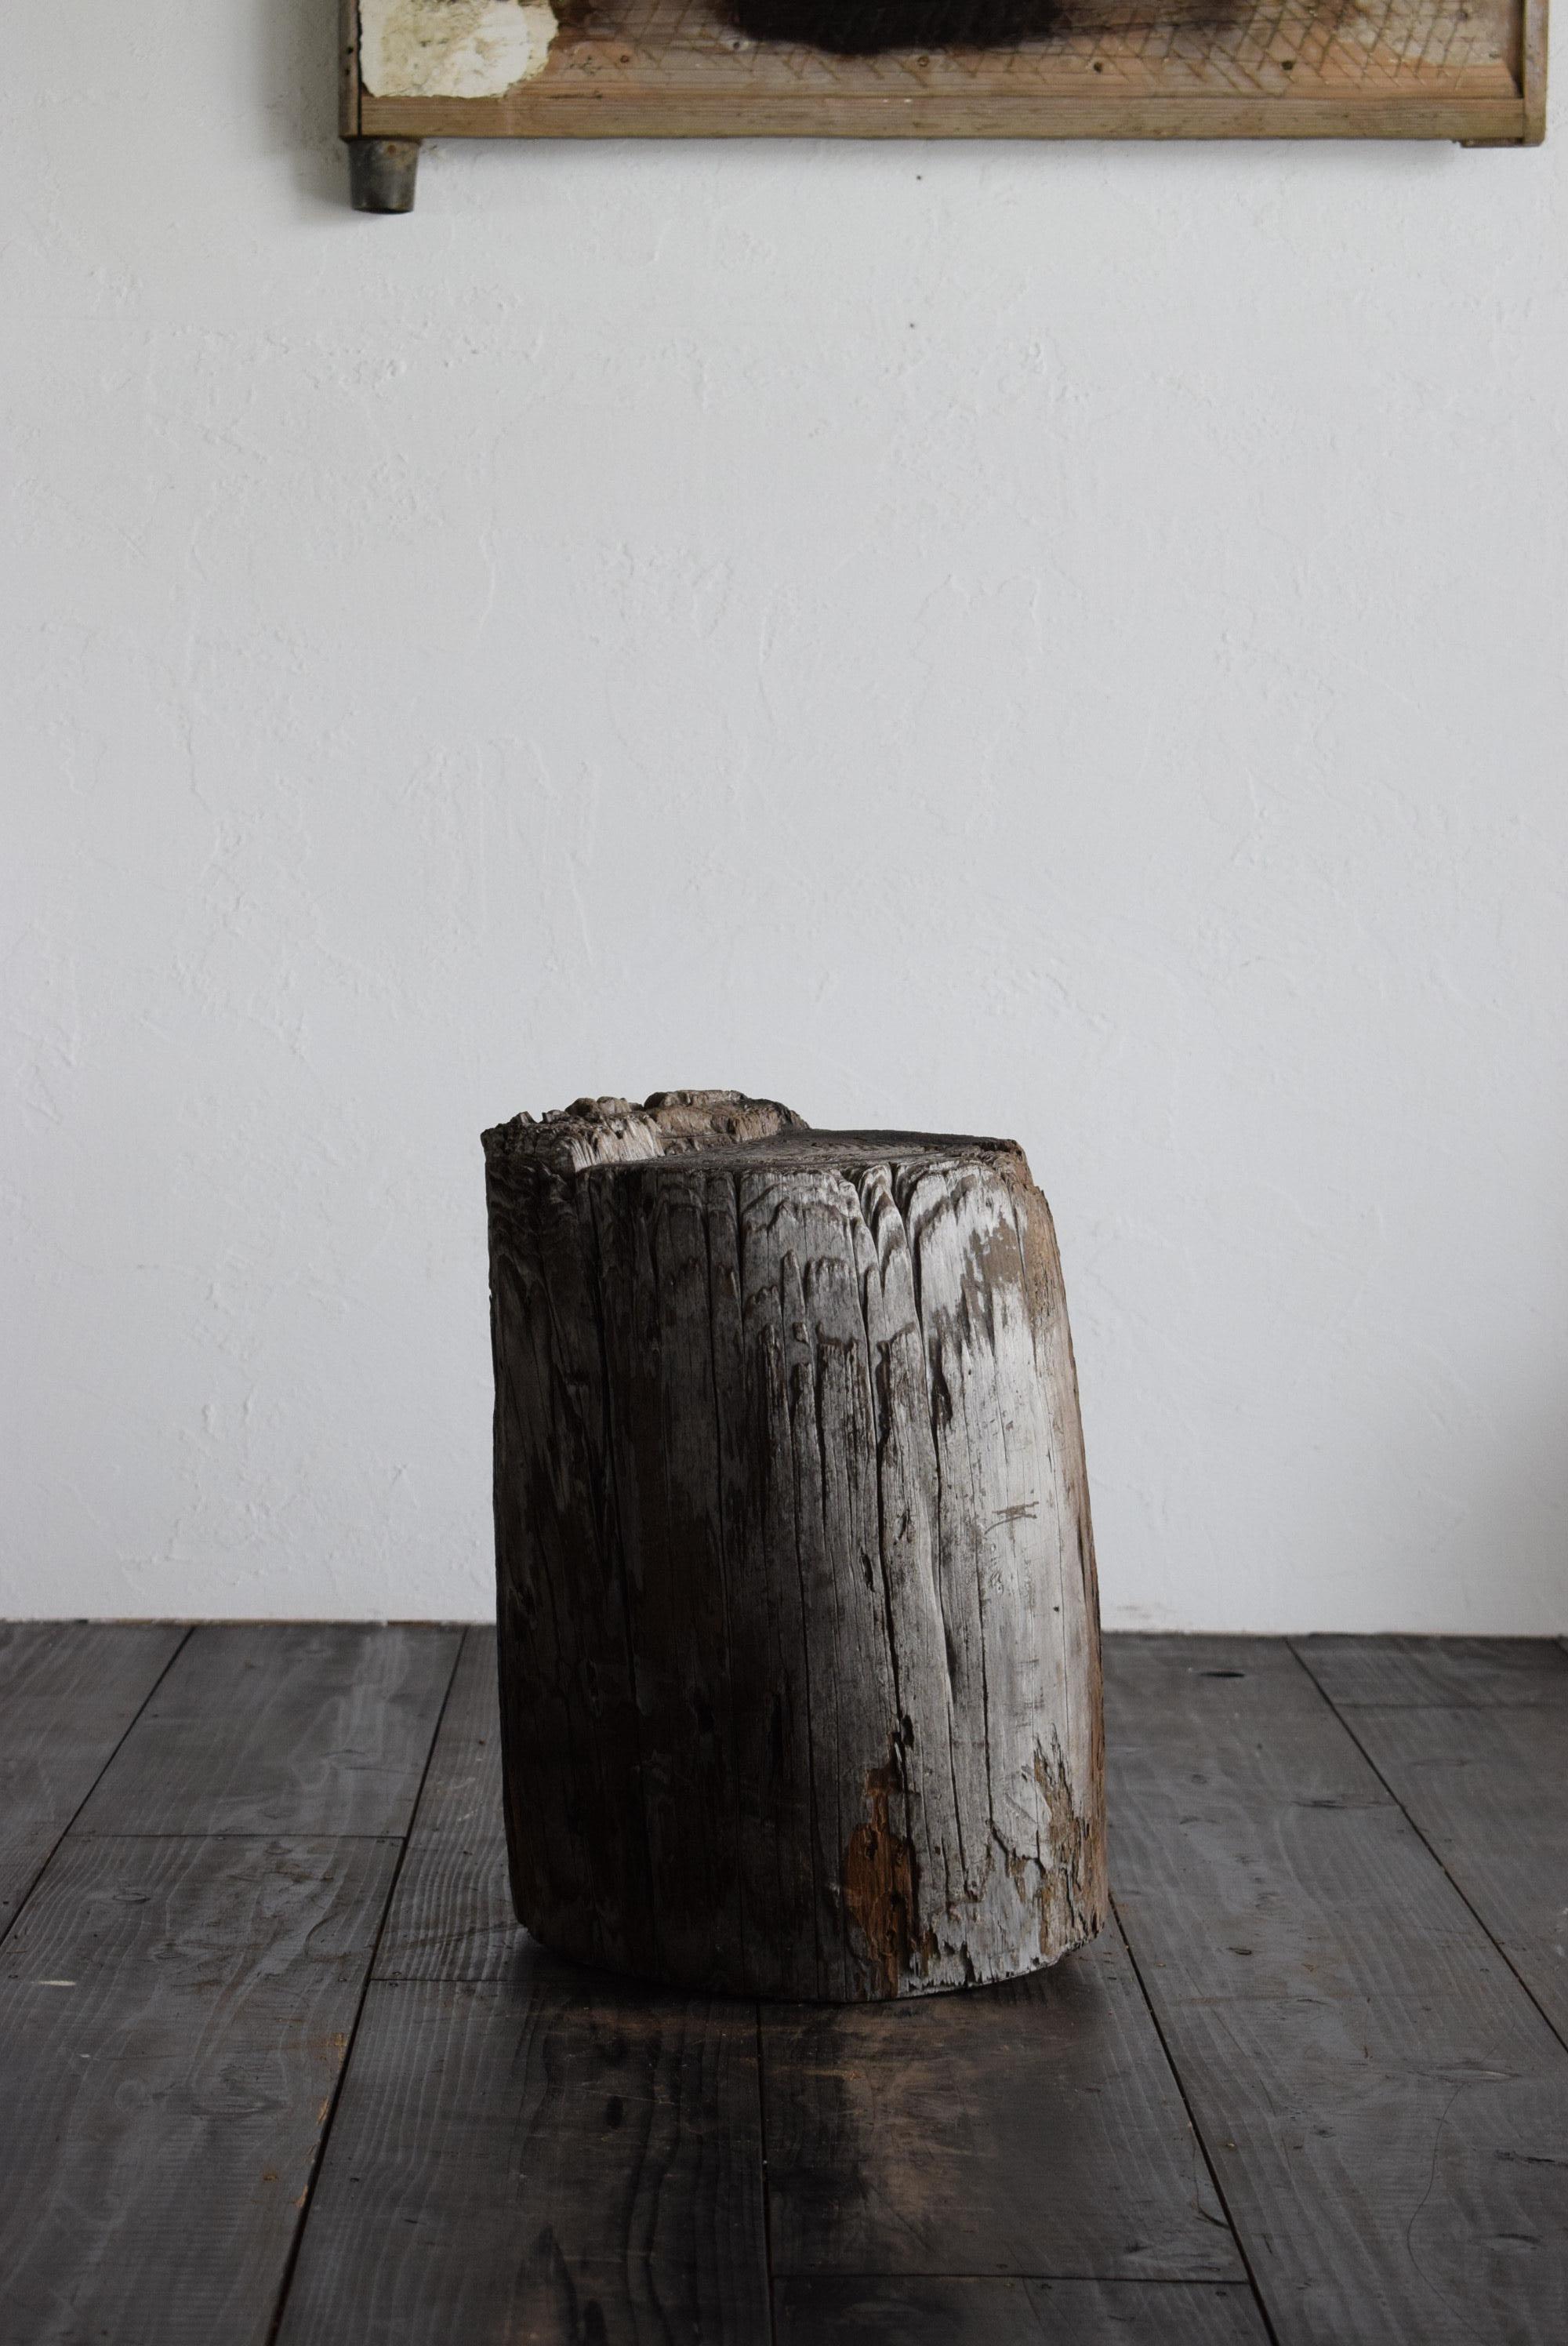 This stool is made from a stump that was cut down from a pine tree. The polished parts give the impression that the chair has been touched and enjoyed. 

In addition, to adjust the instability, another wooden board is attached to the bottom, giving